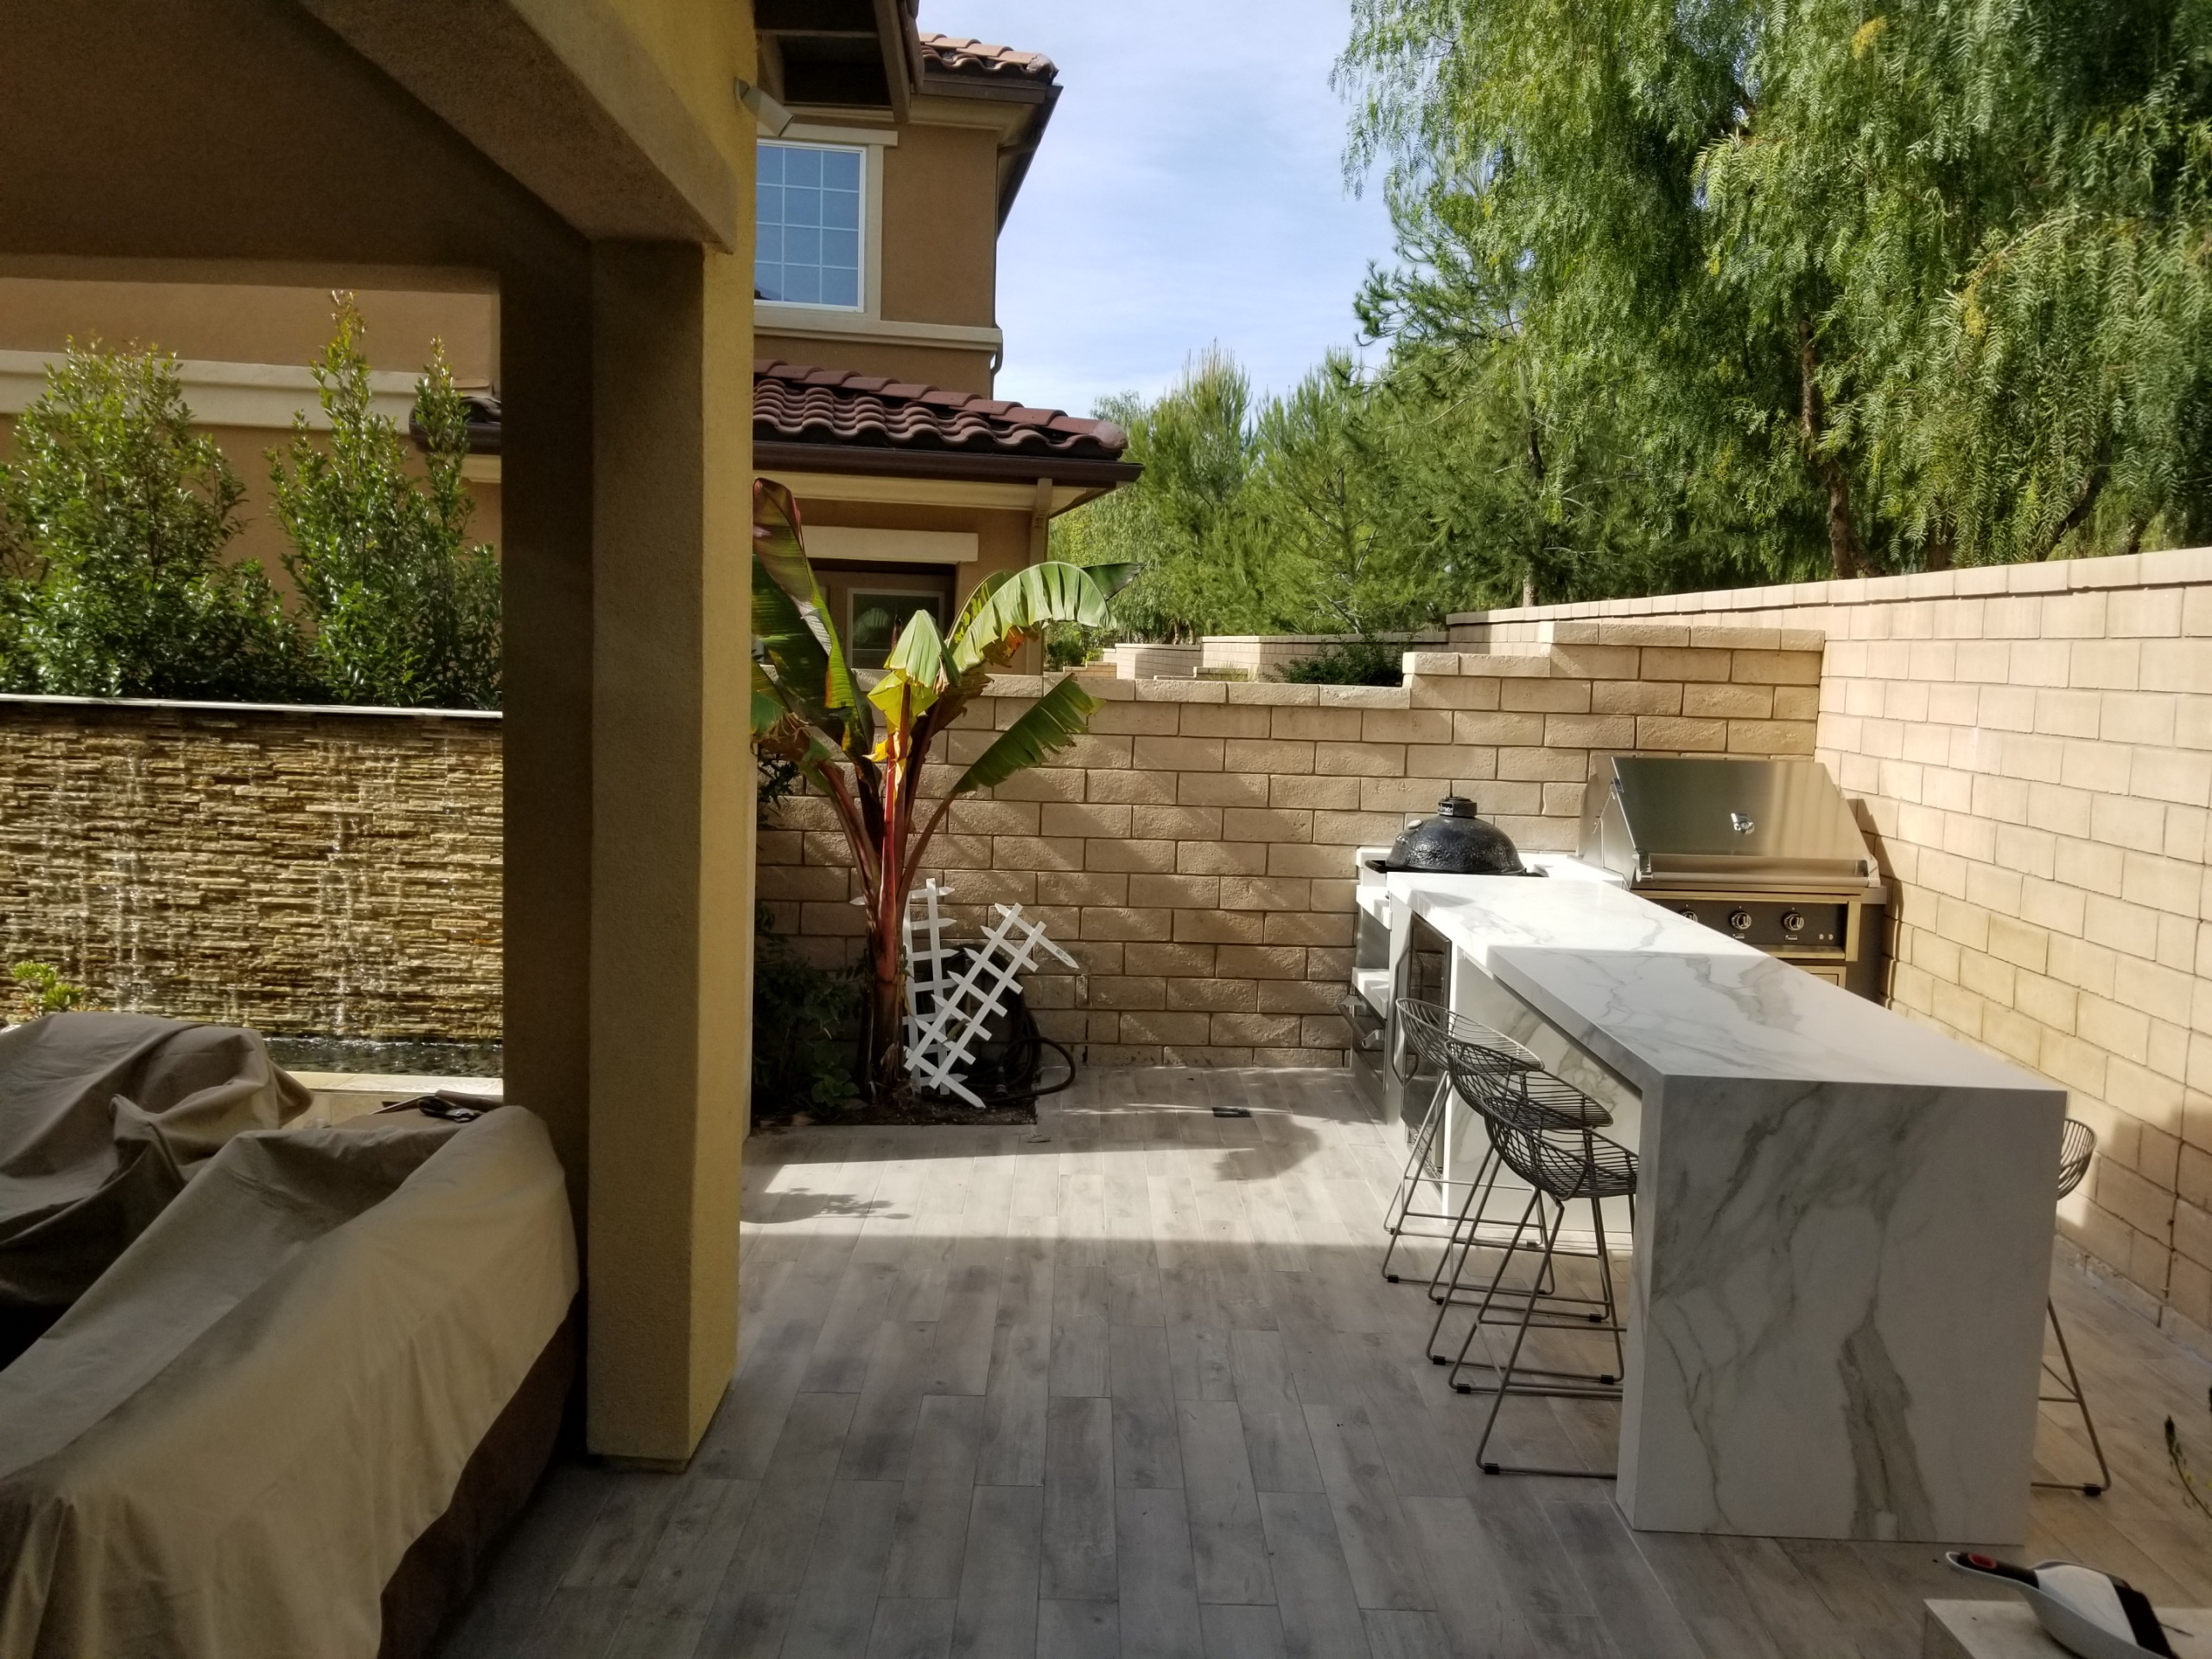 Modern L-shaped BBQ with counter seating on both sides
Patio kitchen – modern backyard patio kitchen idea in Orange County